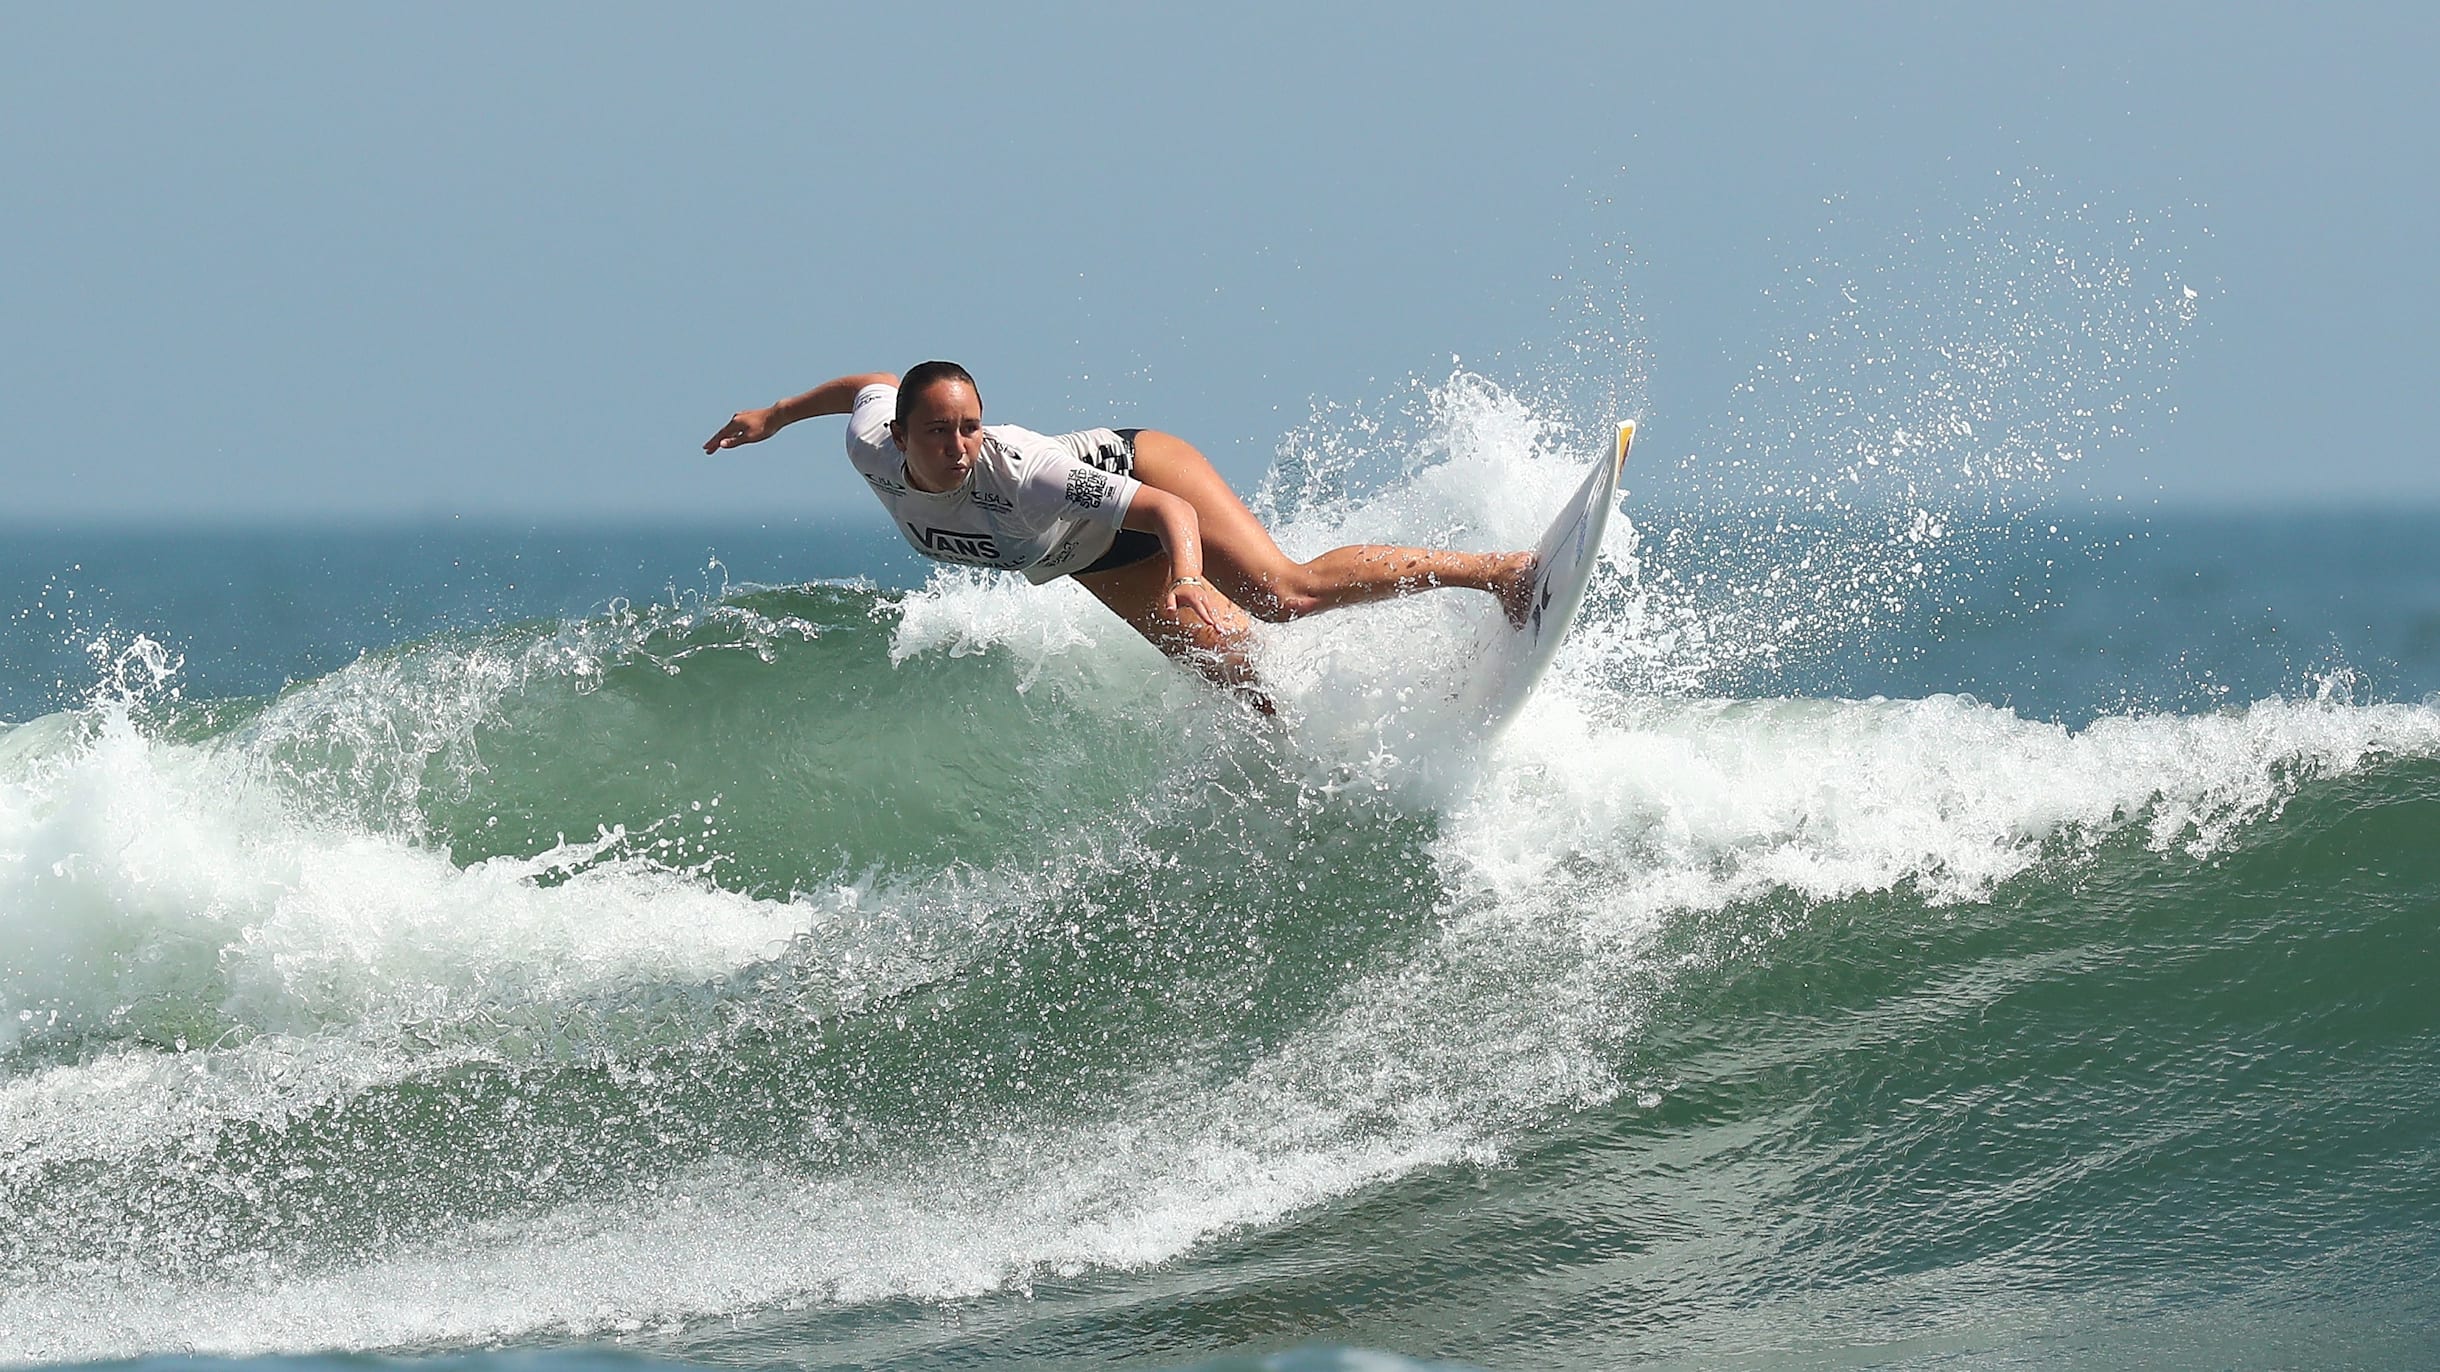 Surfing Master - Apps on Google Play